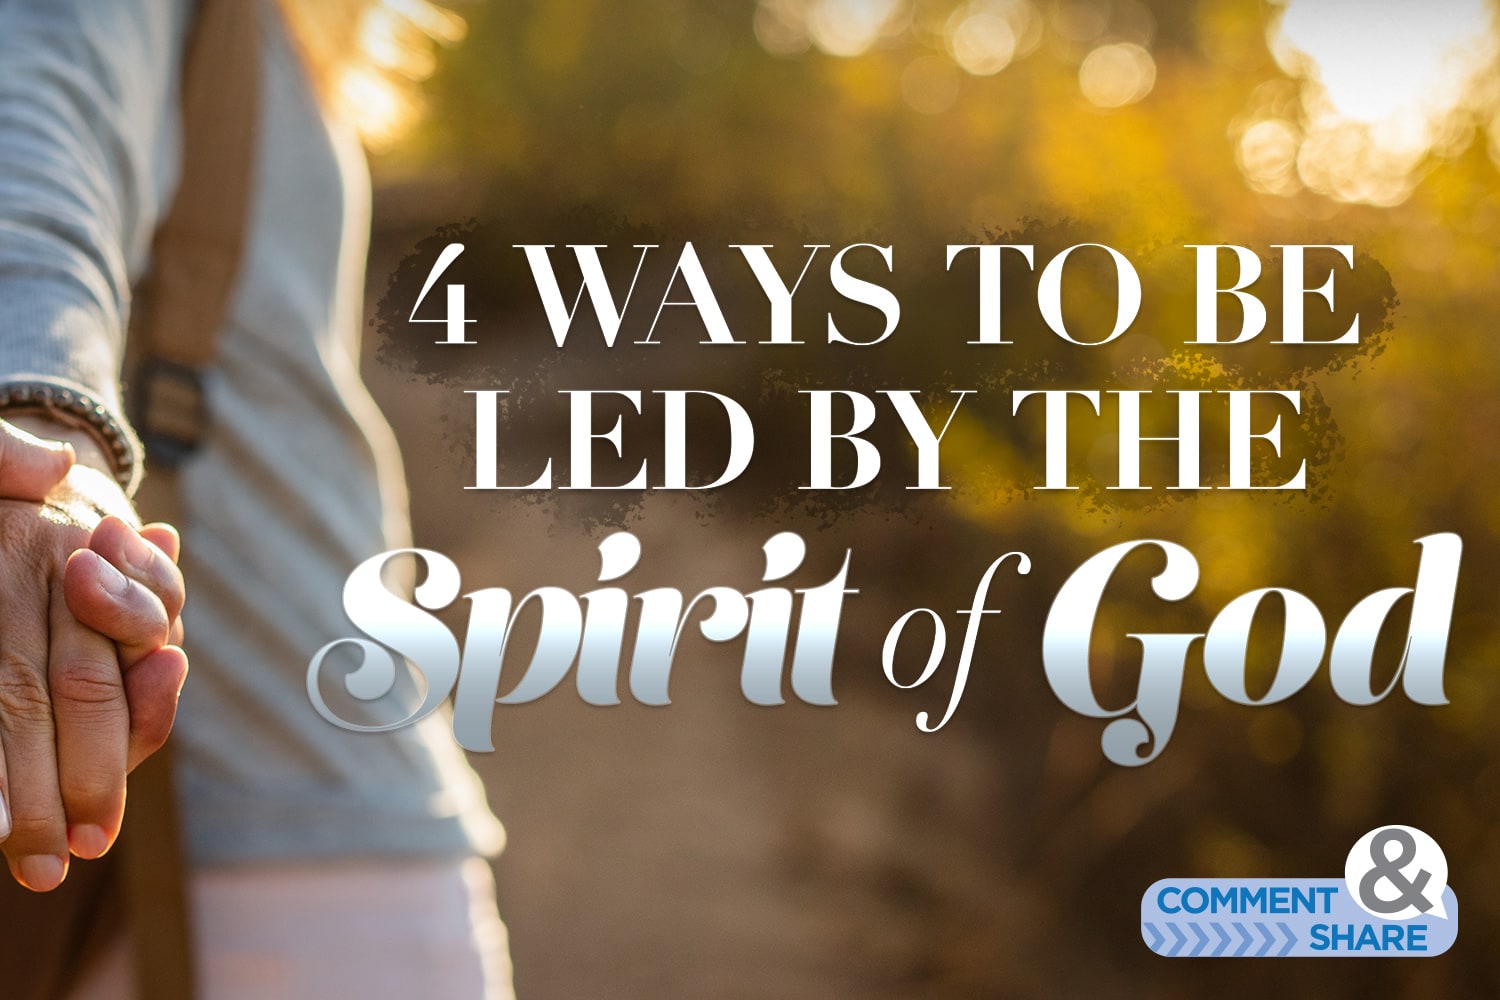 4 Ways to Be Led by the Spirit of God